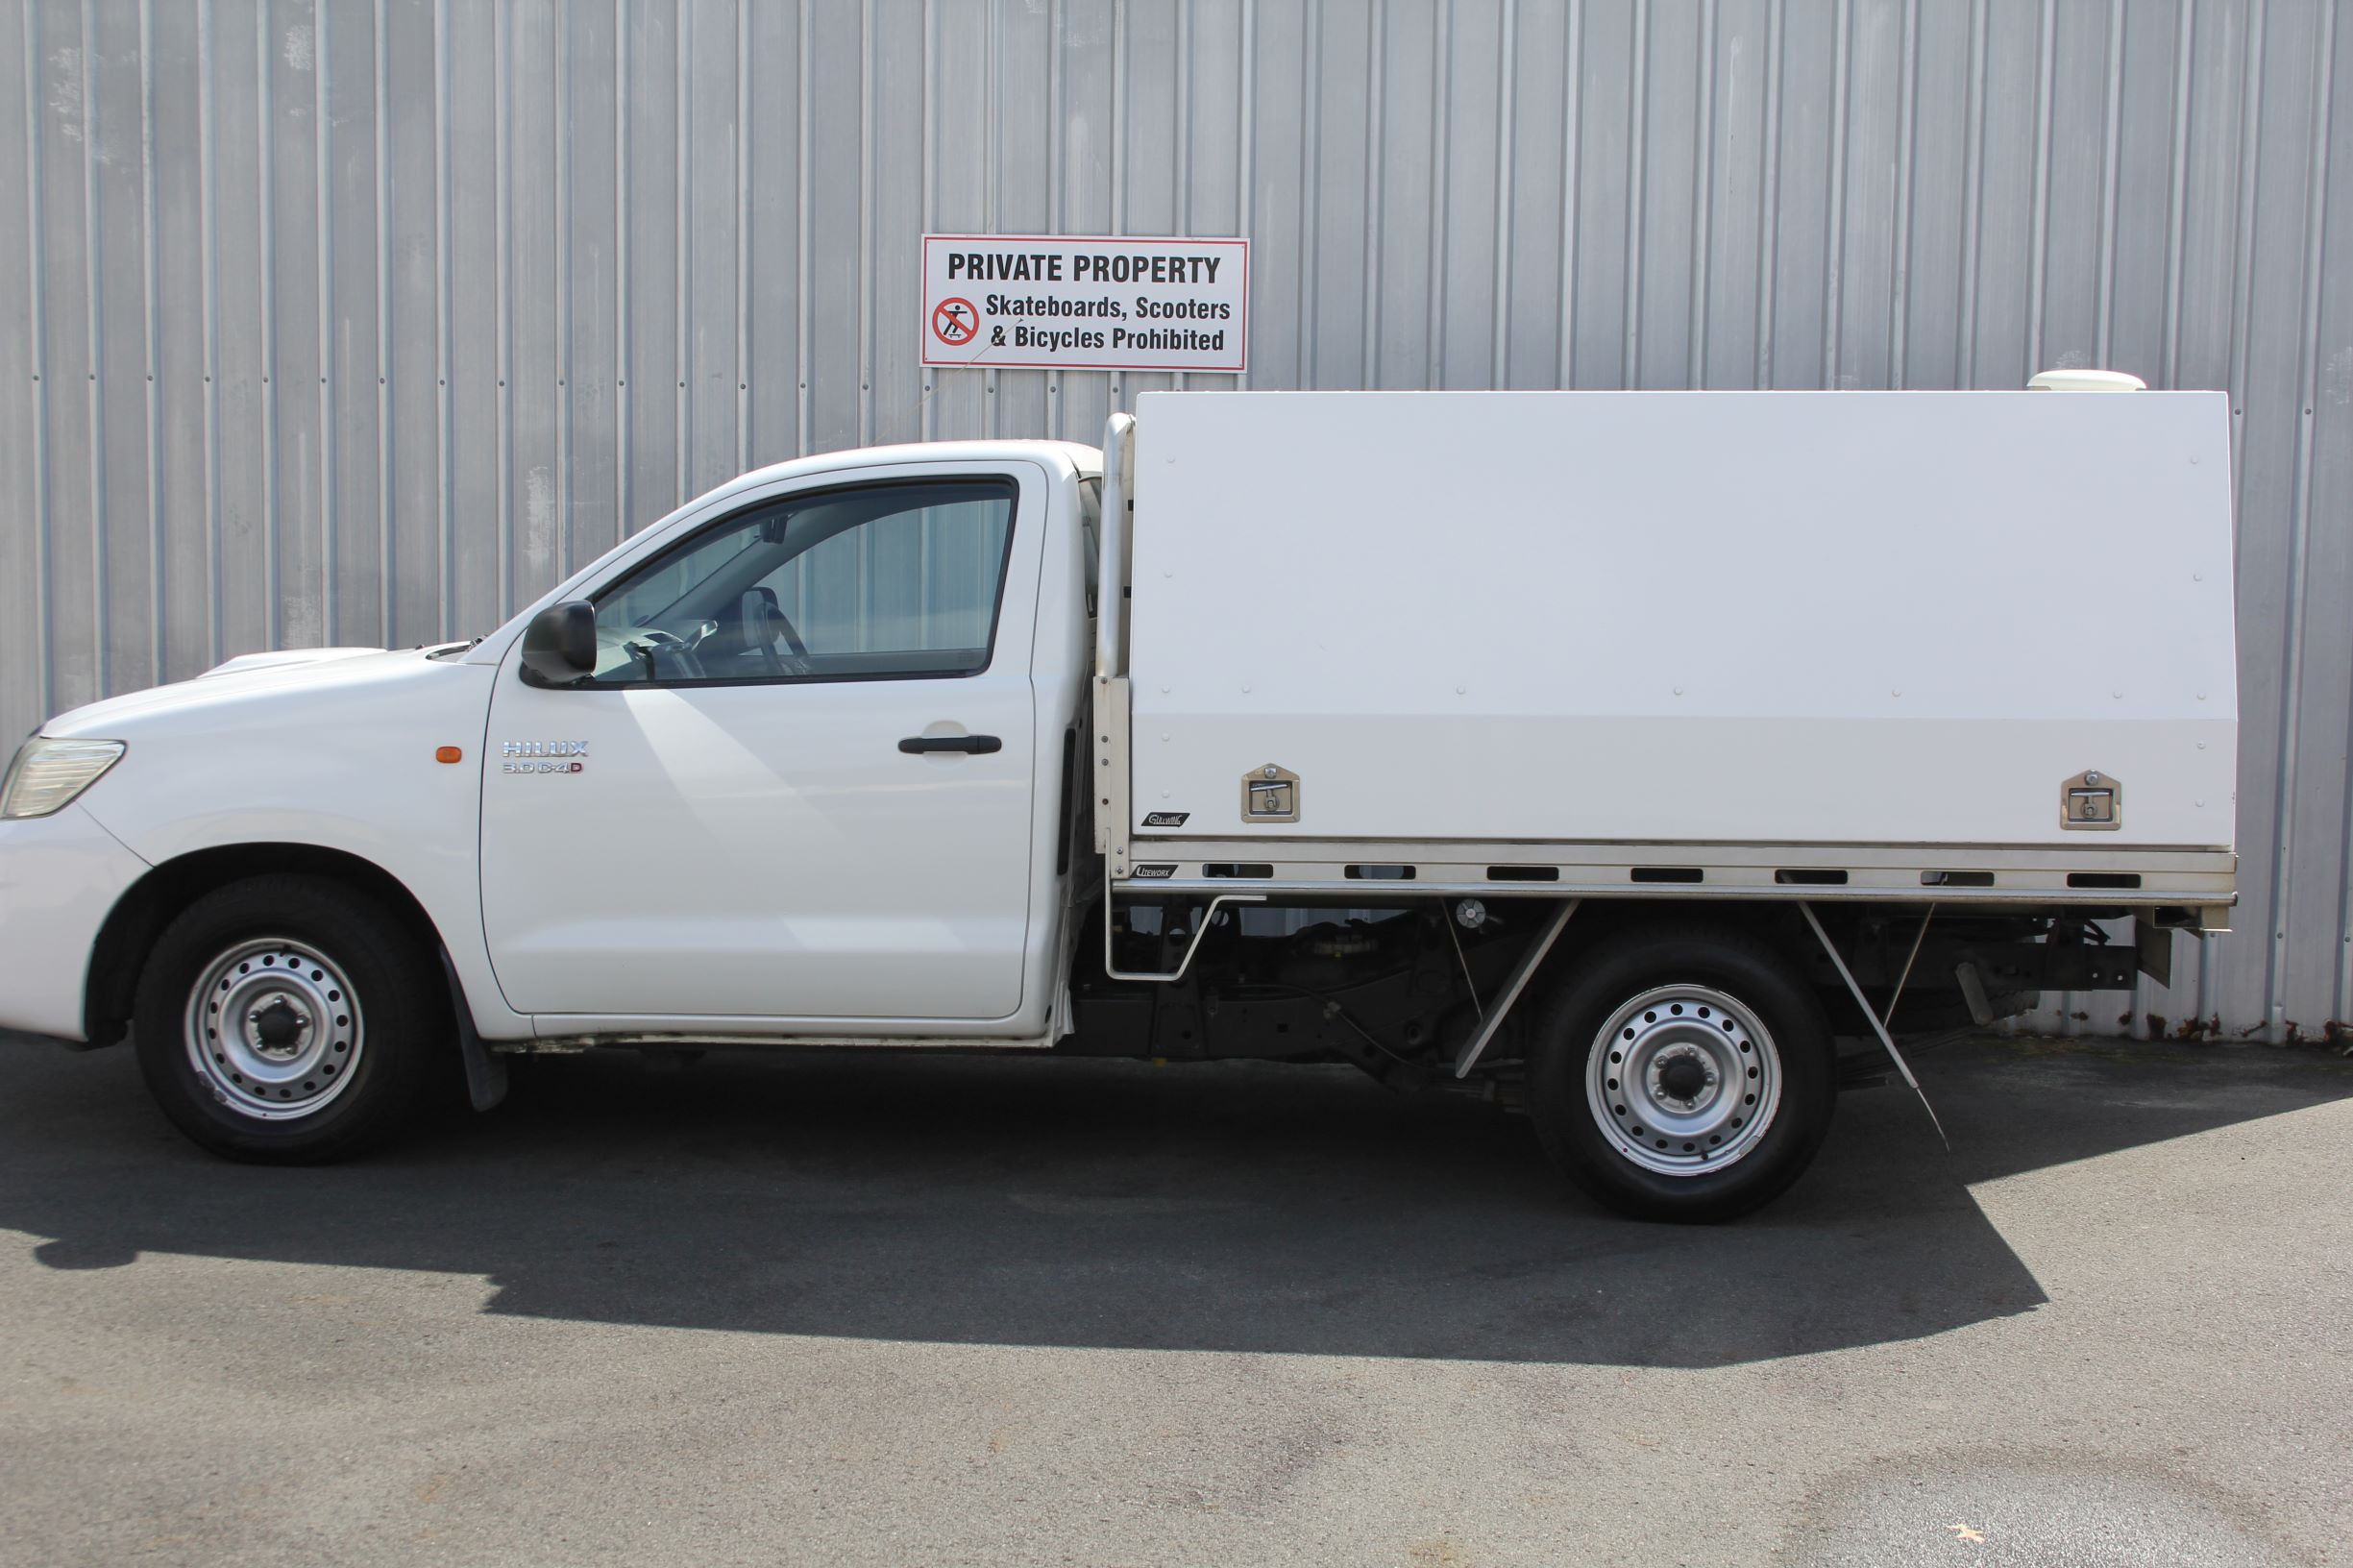 Toyota Hilux toolbox set up 2014 for sale in Auckland